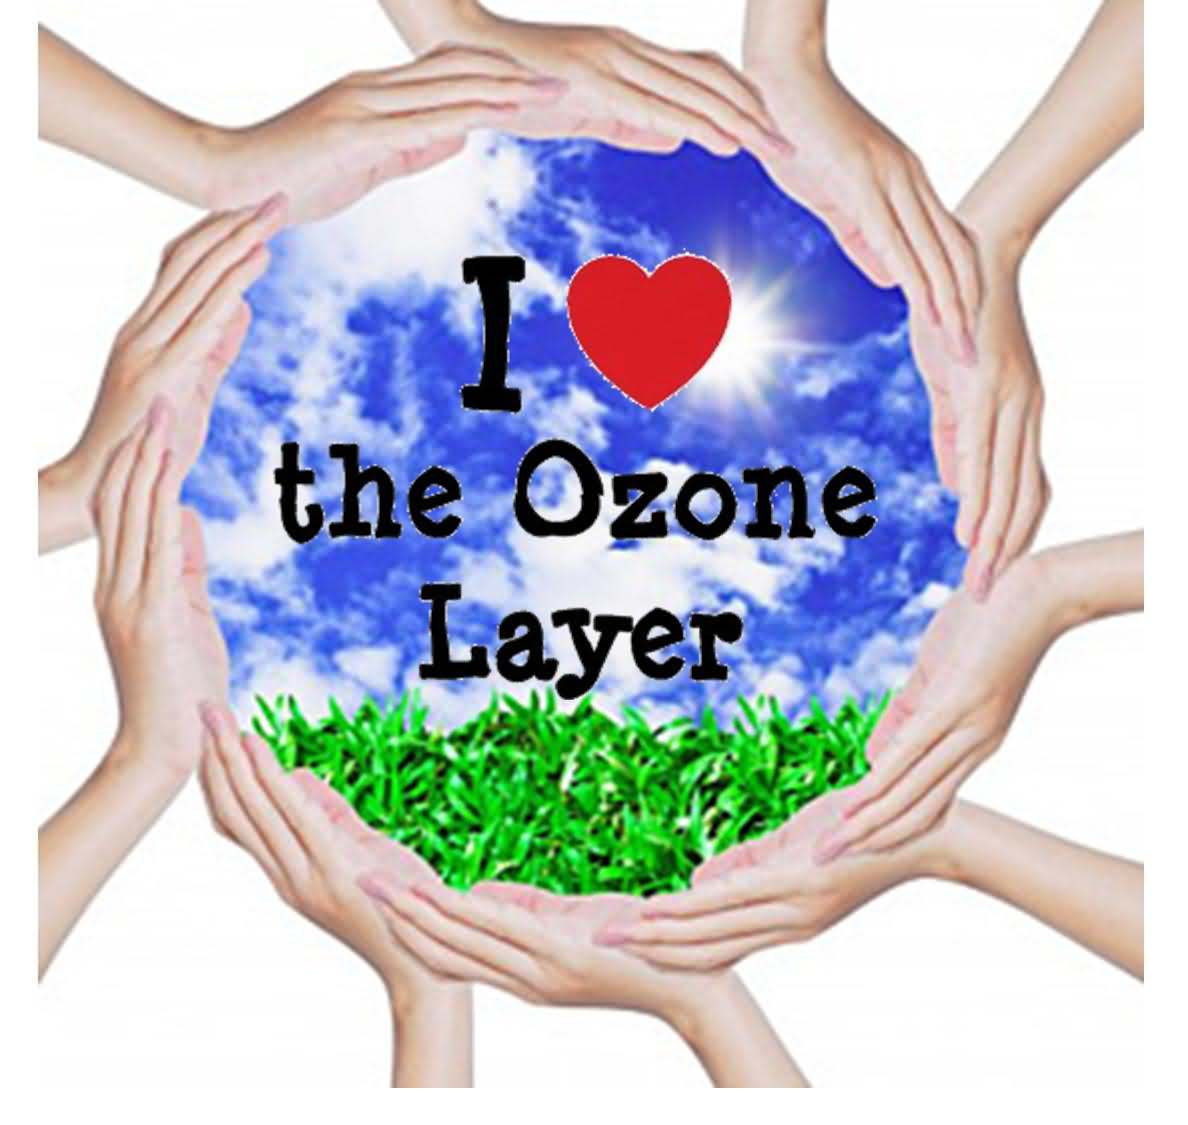 I Love The Ozone Layer International Day for the Preservation of the Ozone Layer Hands Covering Earth Picture